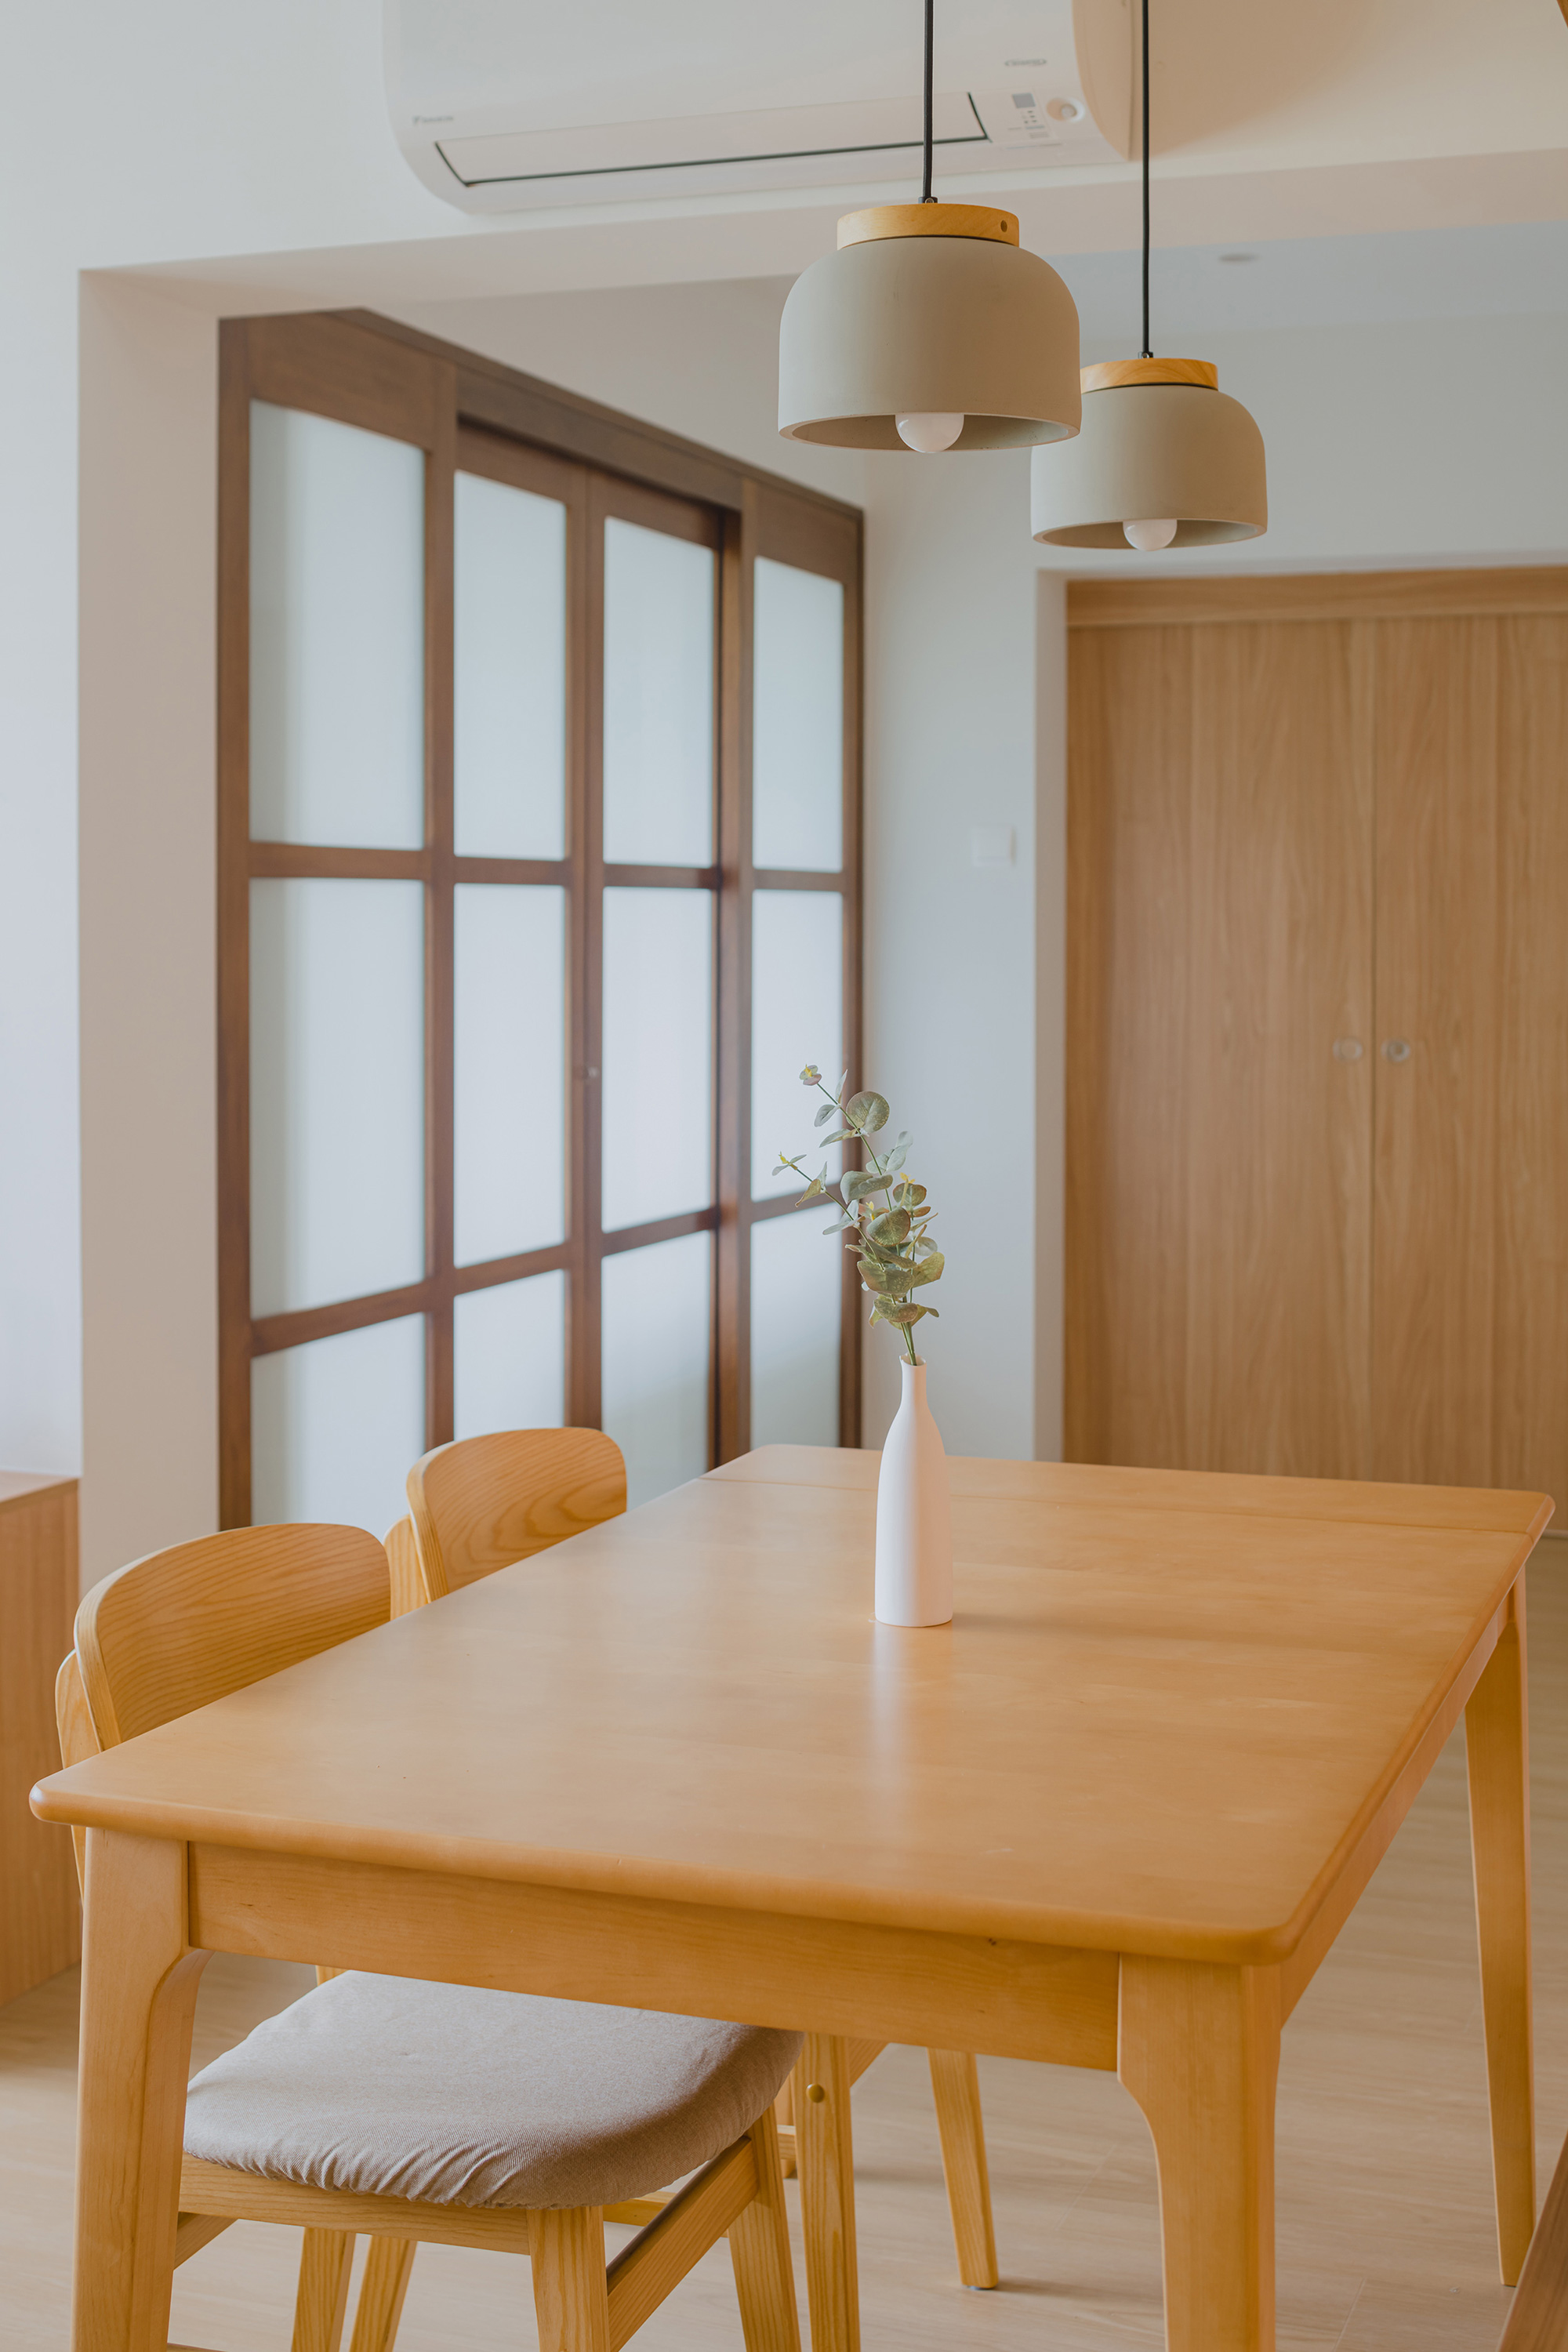 House tour: A Japandi four-room flat in Cantonment Close: Hallway